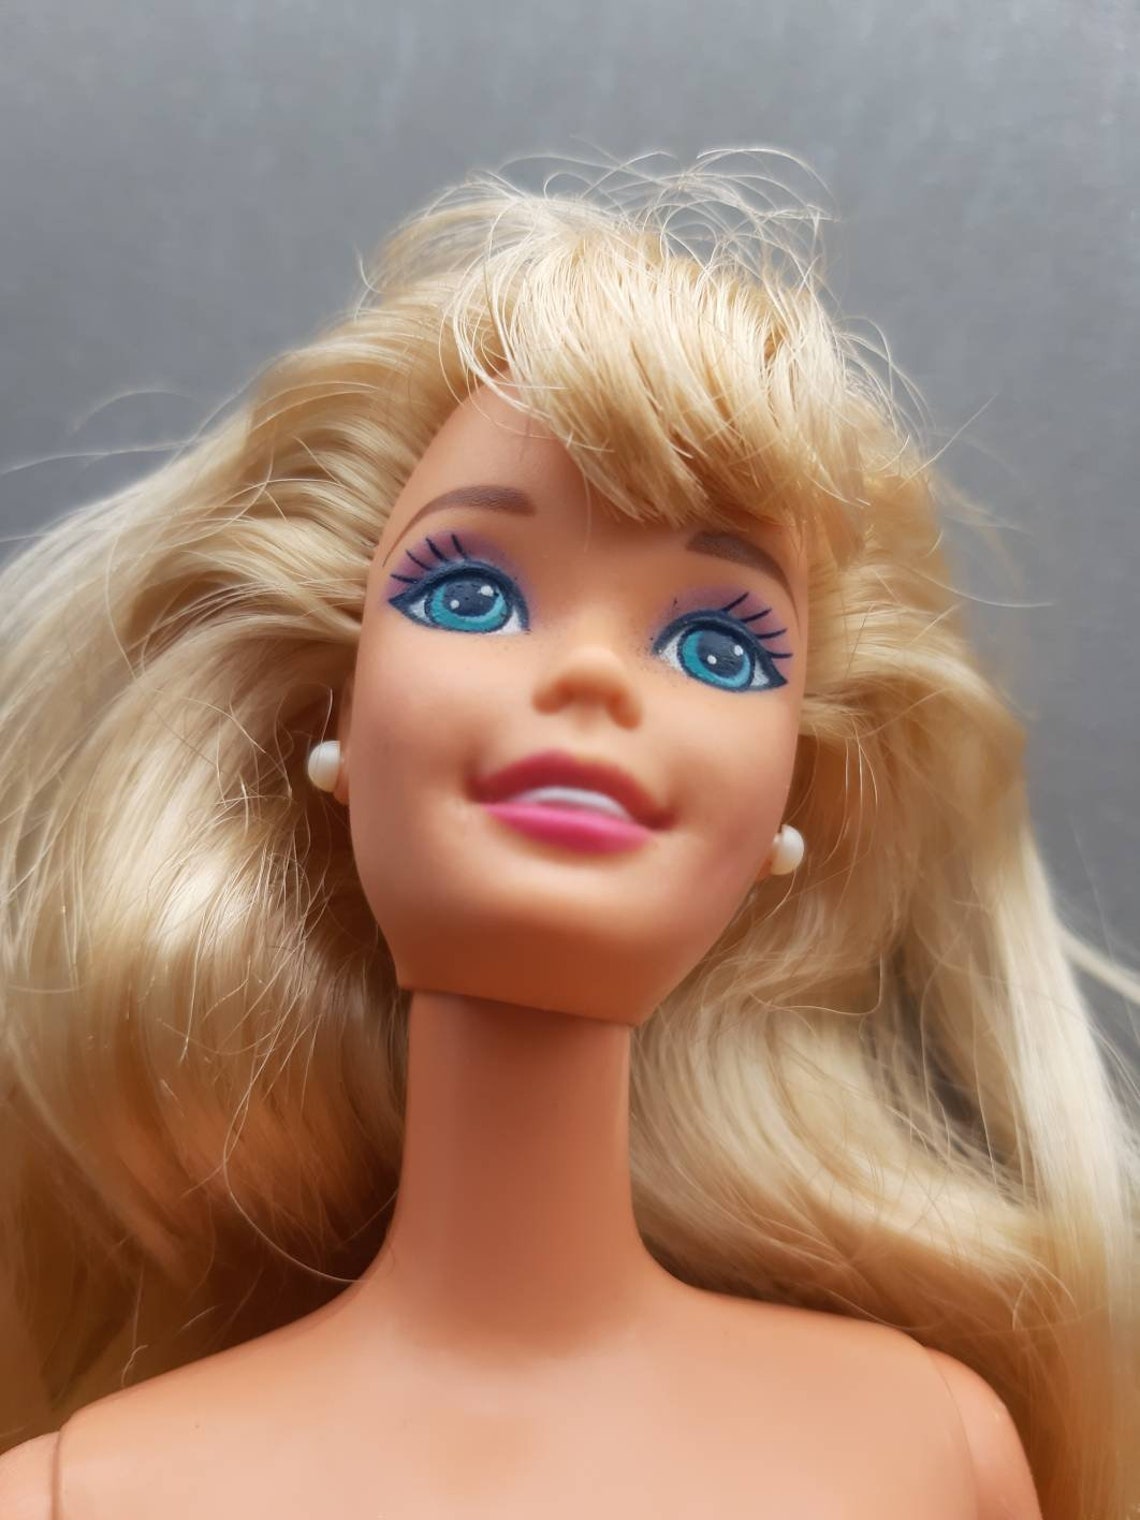 1976 Mattel Barbie Doll Full Hair Great Condition For Etsy 